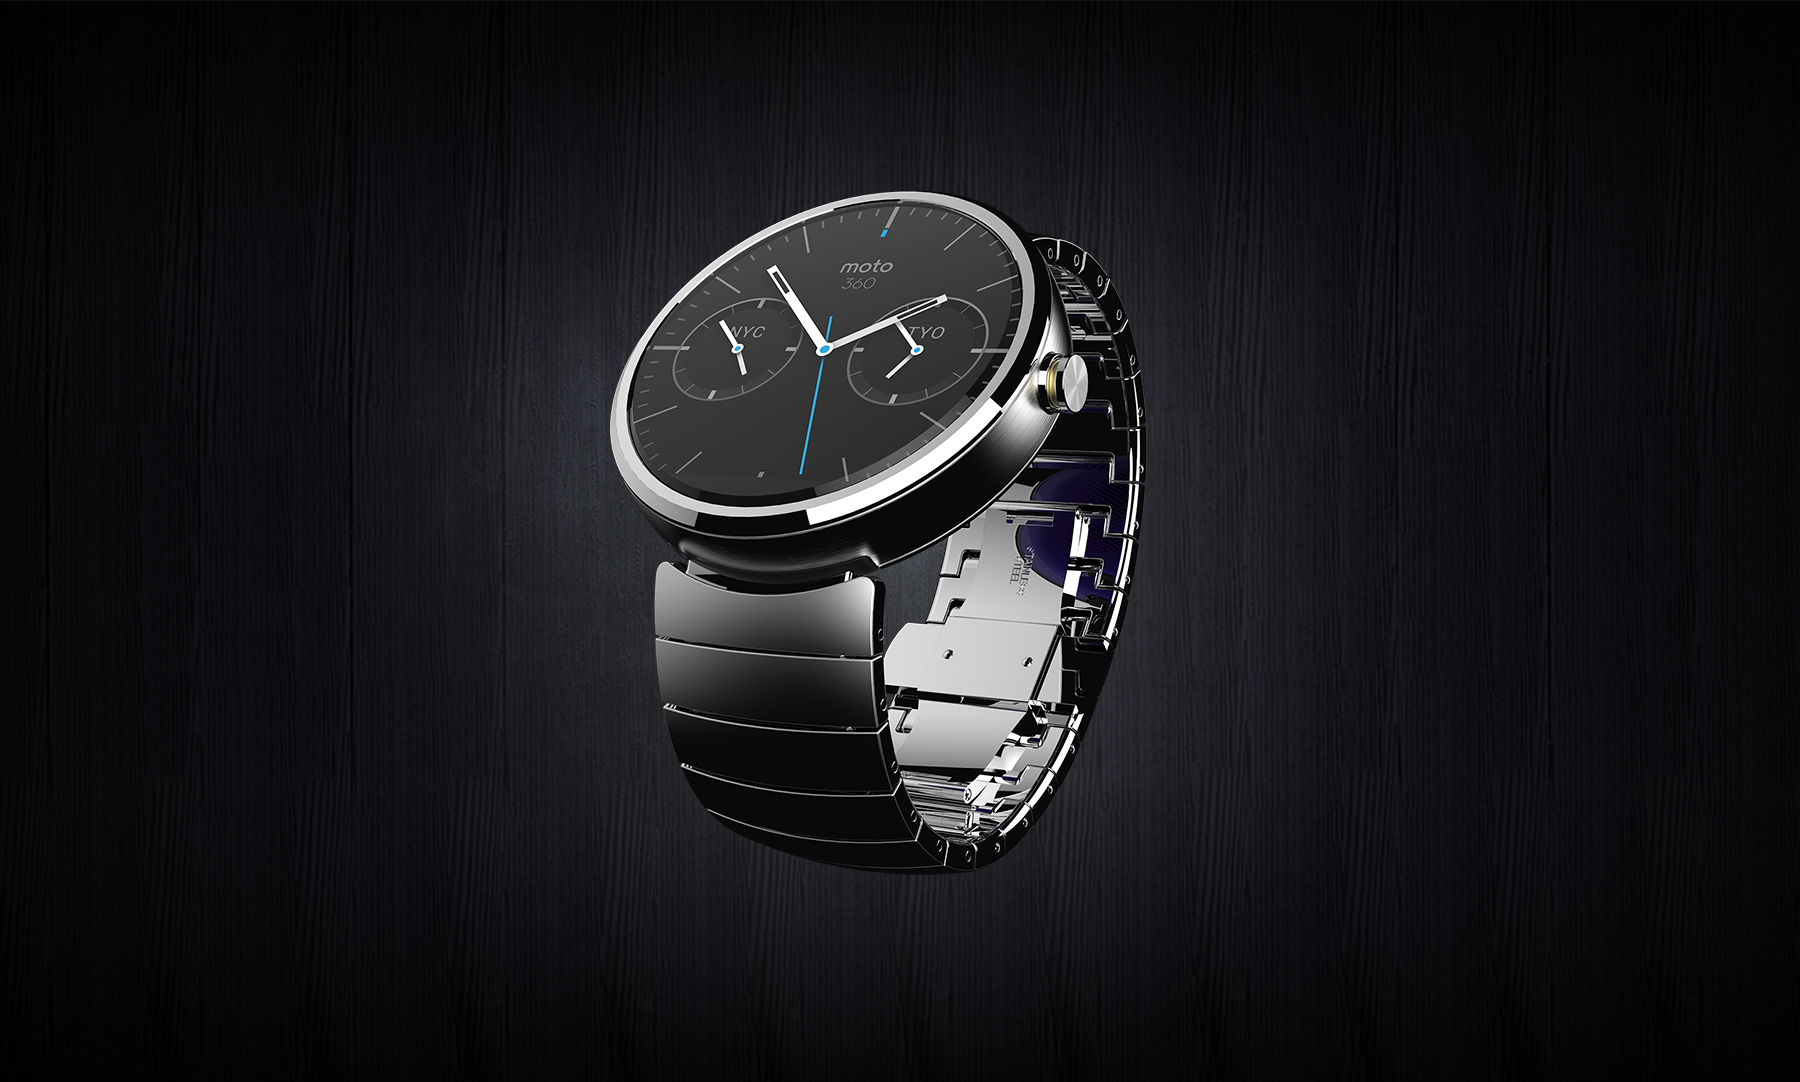 moto 360 - for some reason we don't have an alt tag here